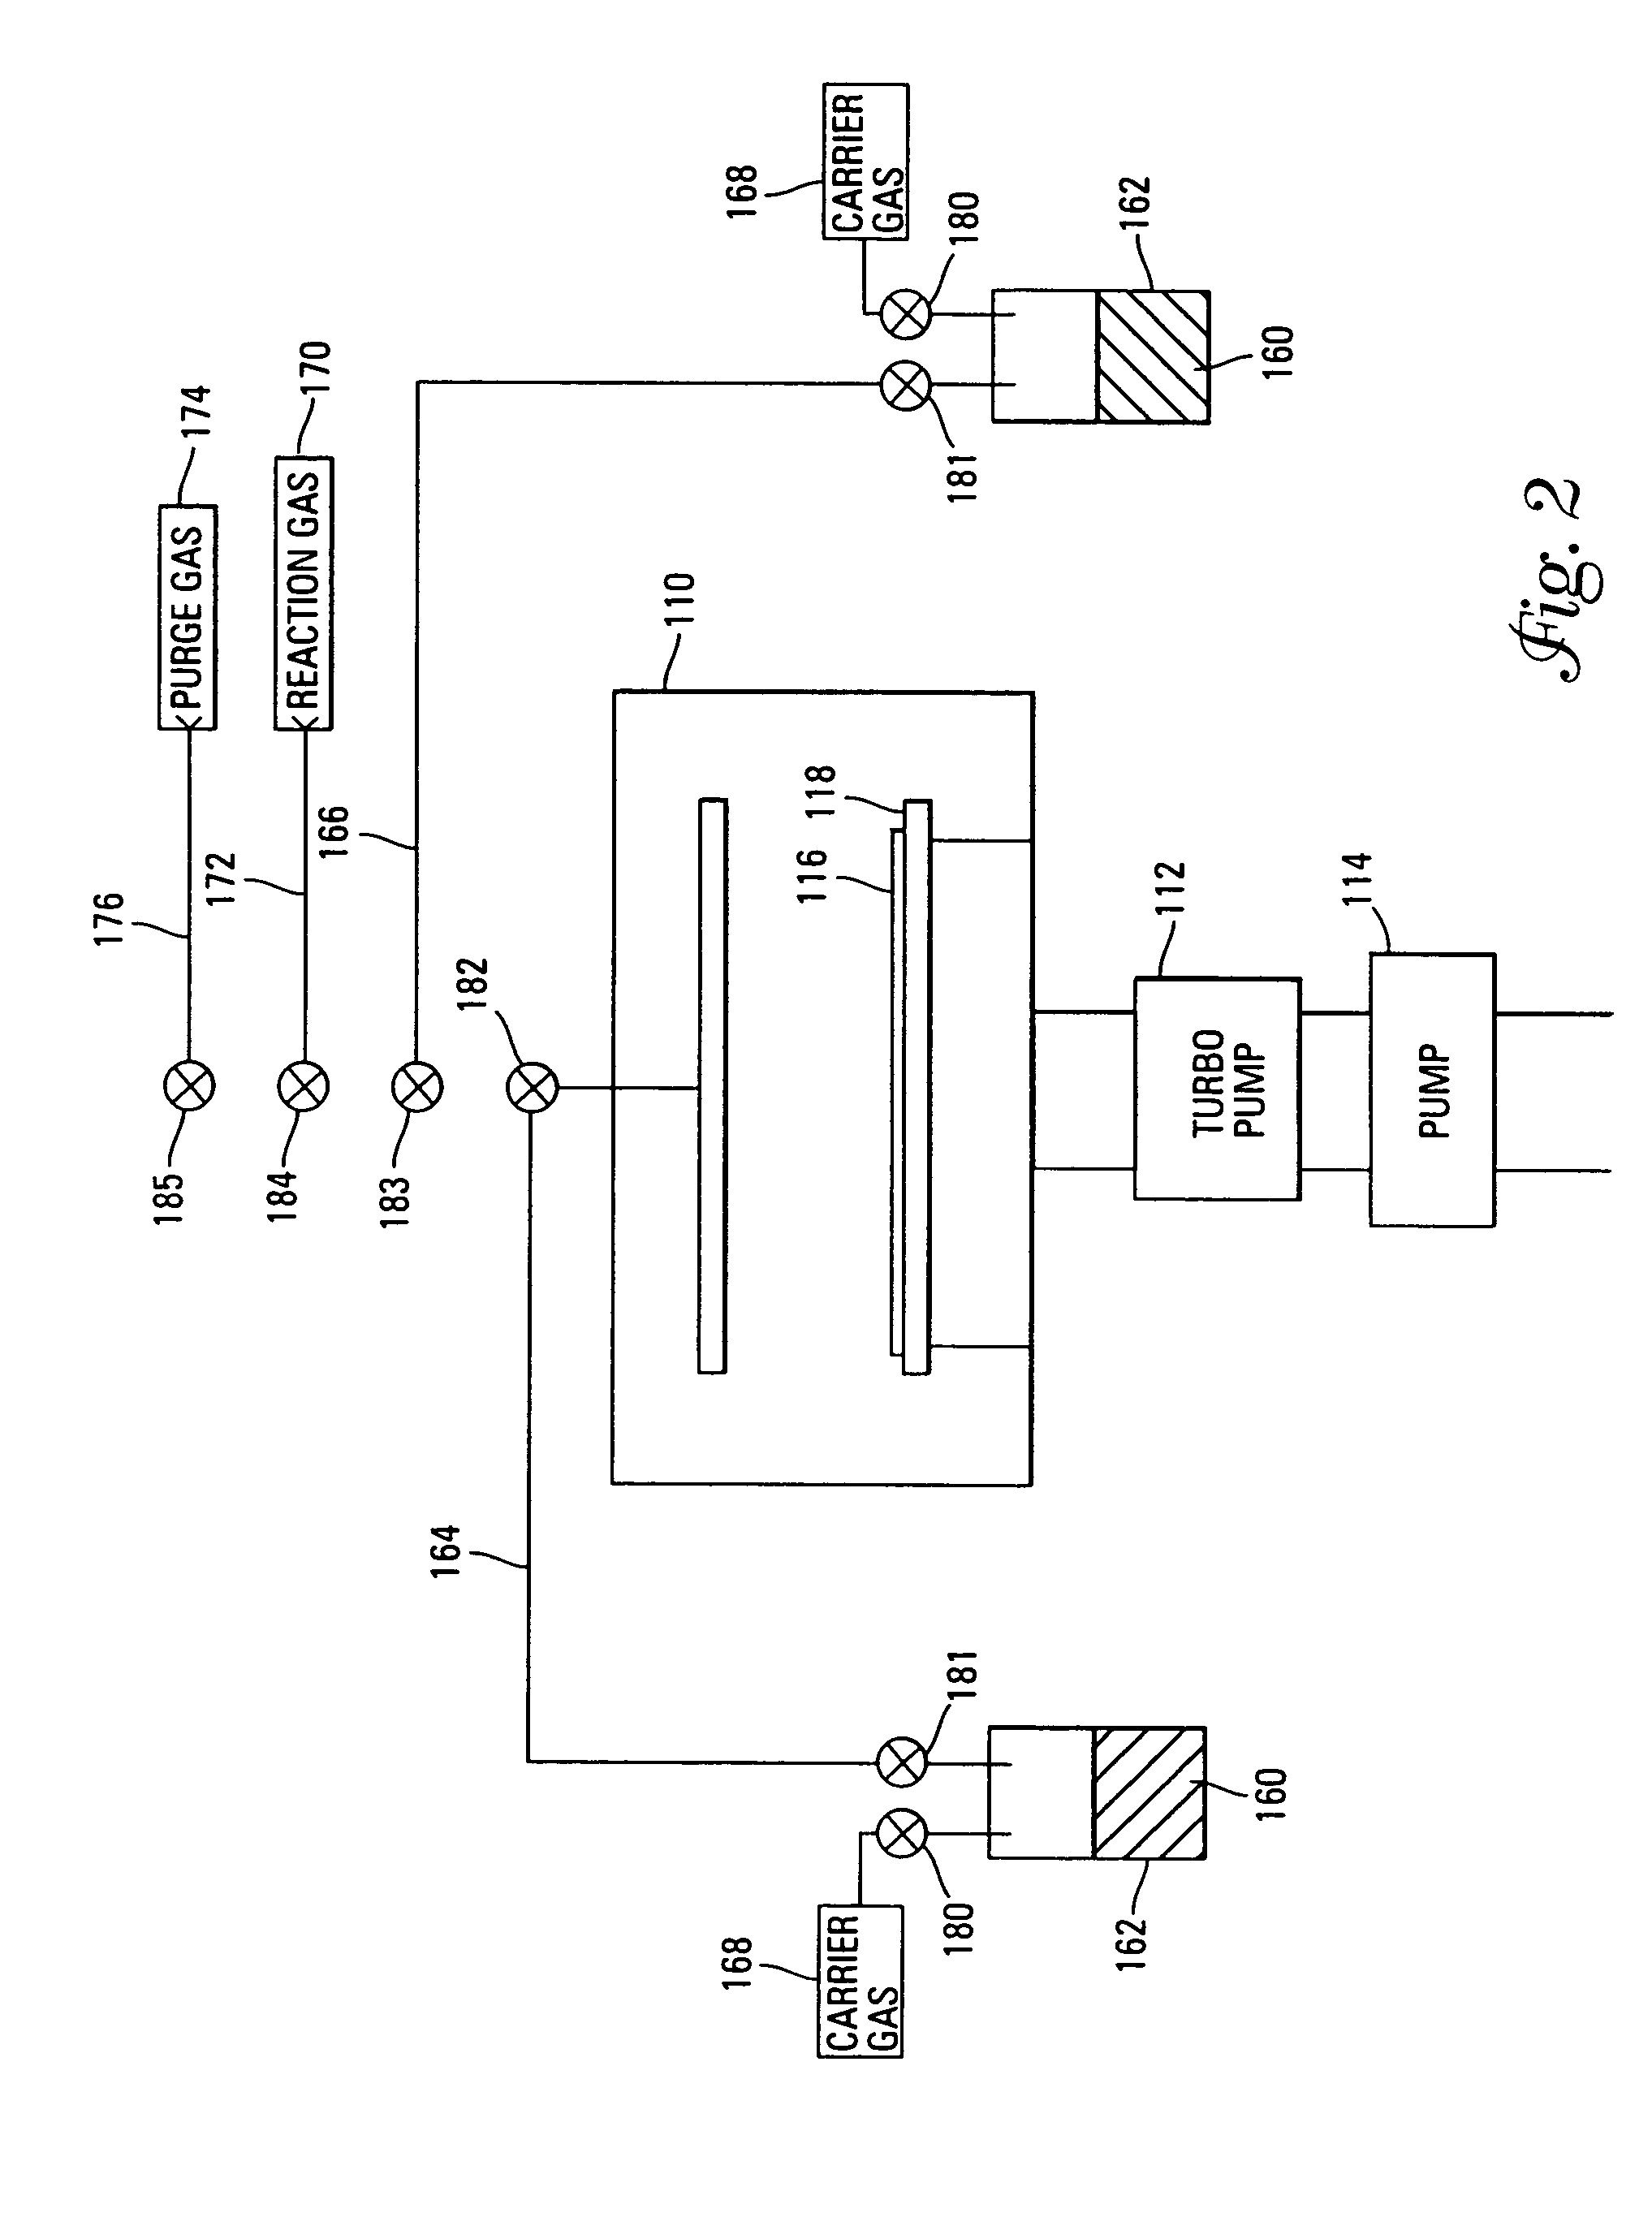 Systems and methods for forming strontium- and/or barium-containing layers